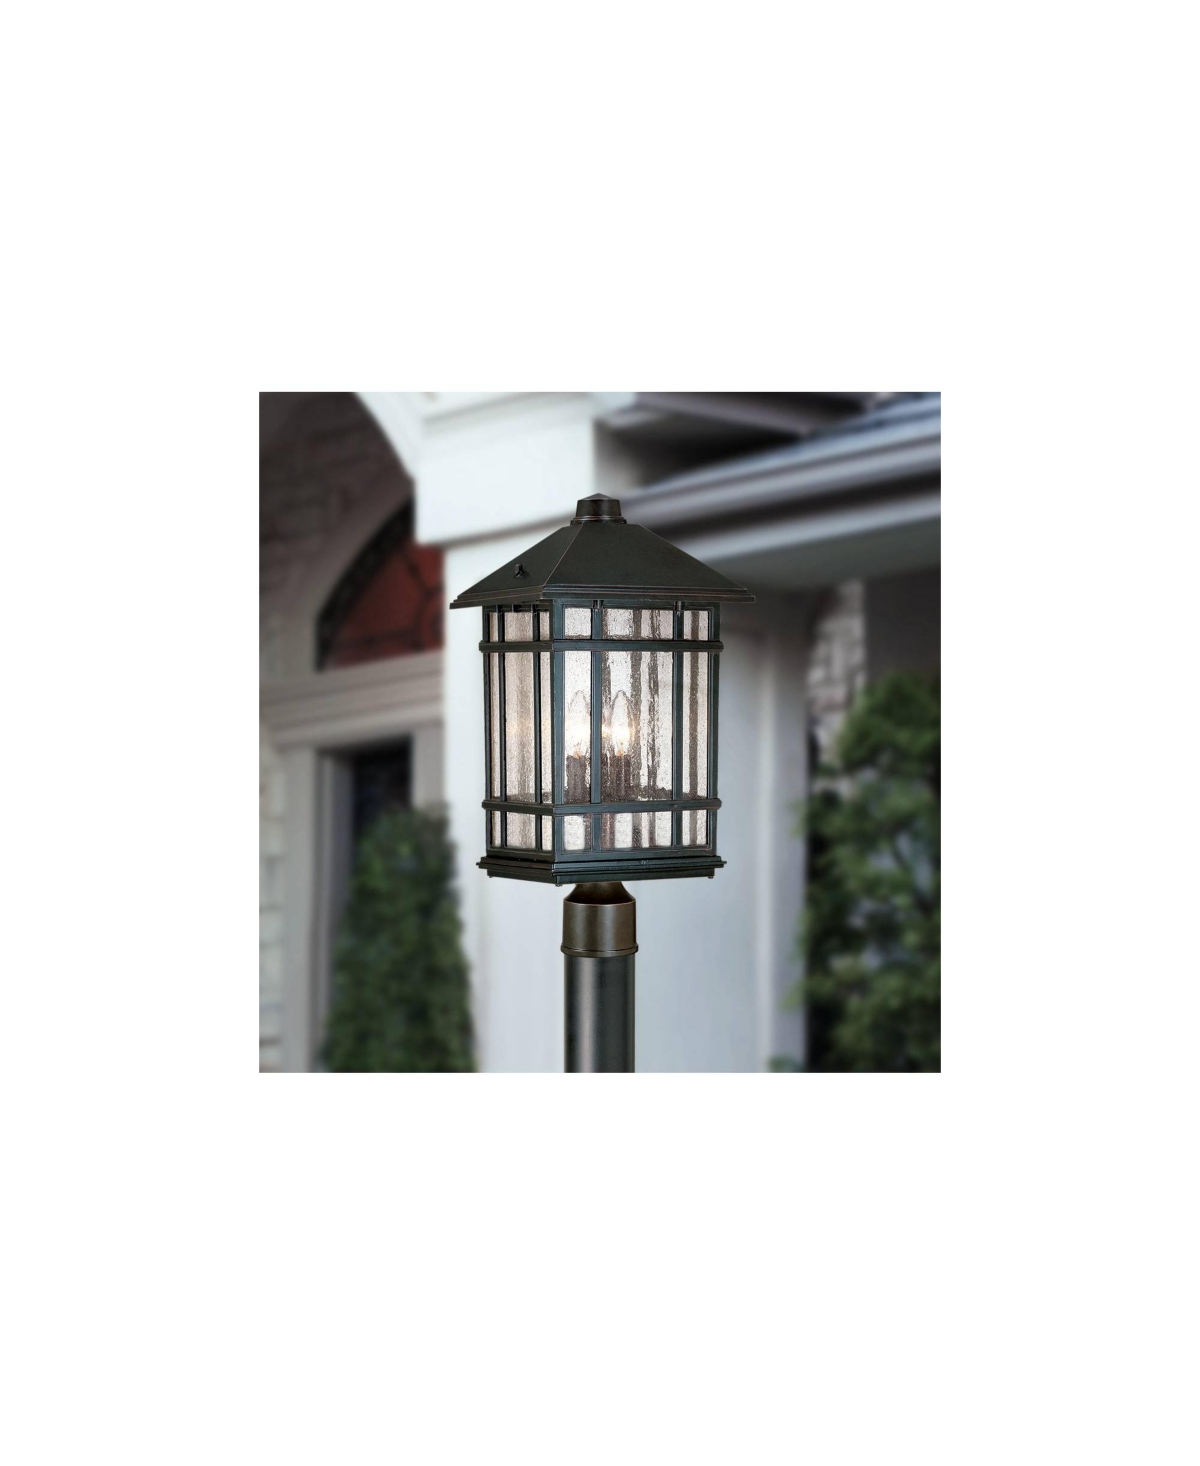 Sierra Craftsman Art Deco Outdoor Post Light Rubbed Bronze 18" Frosted Seeded Glass Panels for Exterior House Porch Patio Outside Deck Garage Yard Gar